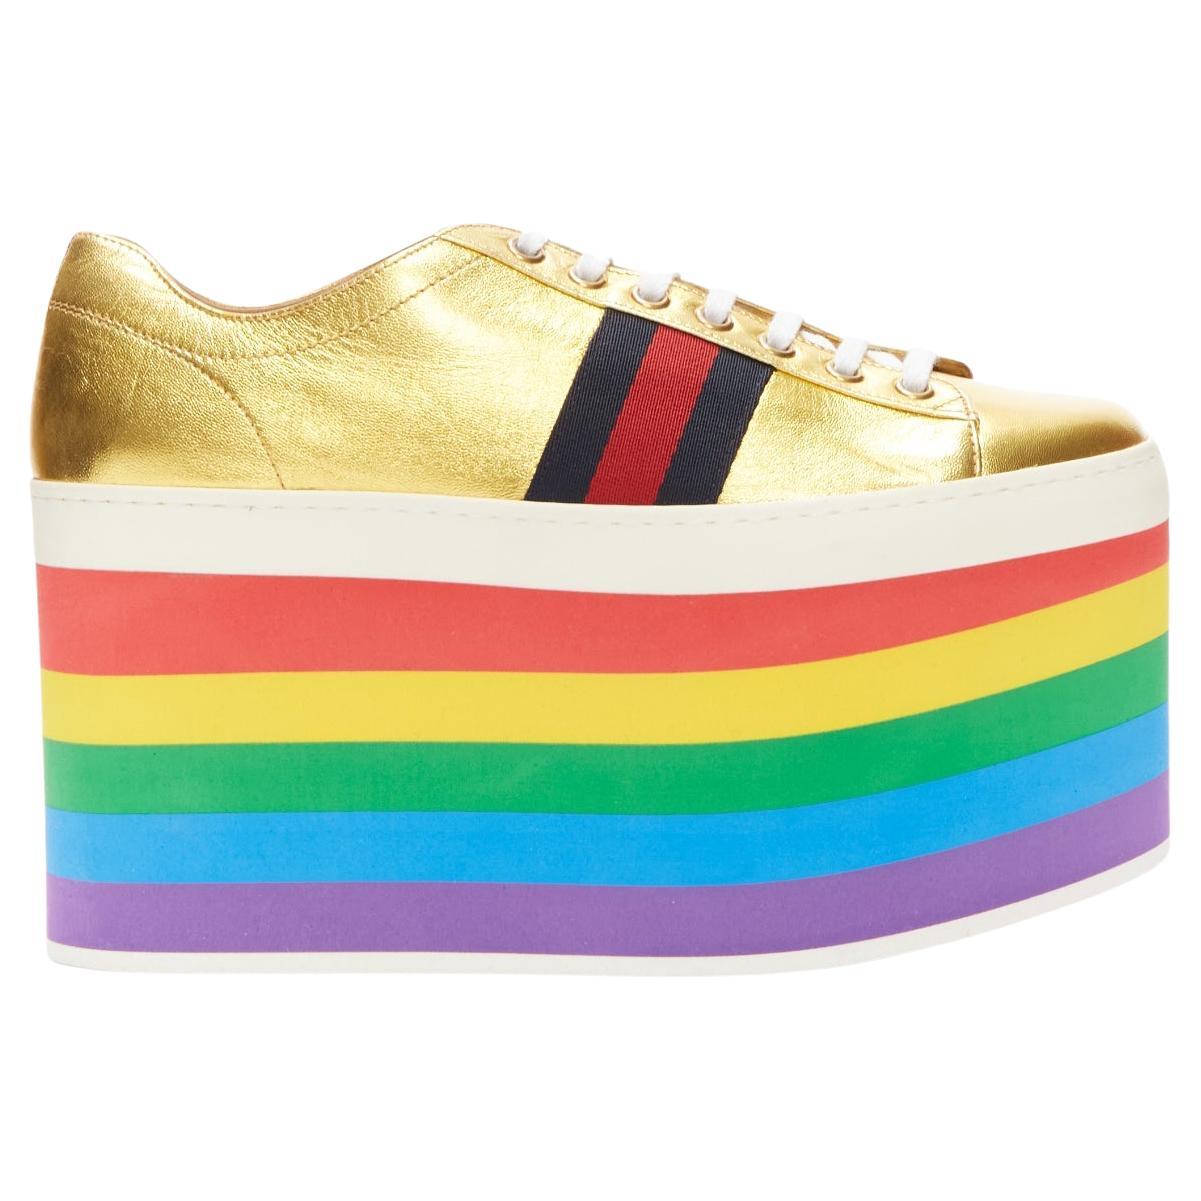 GUCCI Alessandro Michele Peggy rainbow gold web platform sneakers EU37.5 For Sale